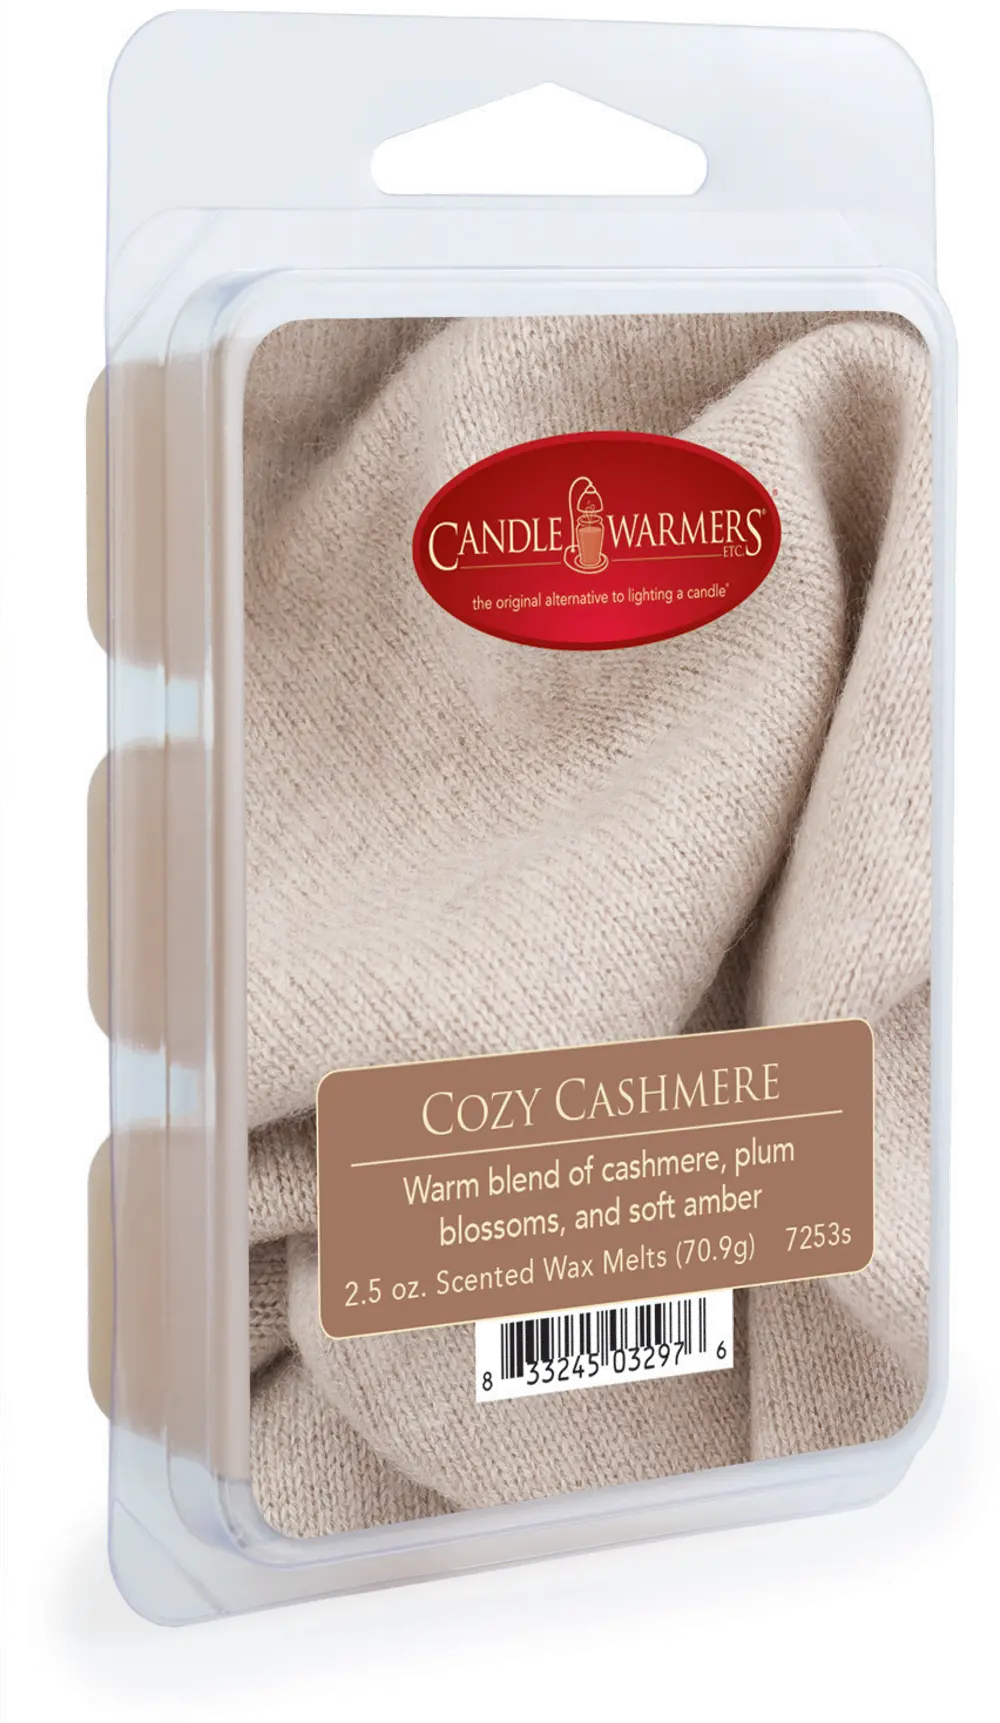 Cozy Cashmere 2.5oz Wax Melt - Candle Warmers-1